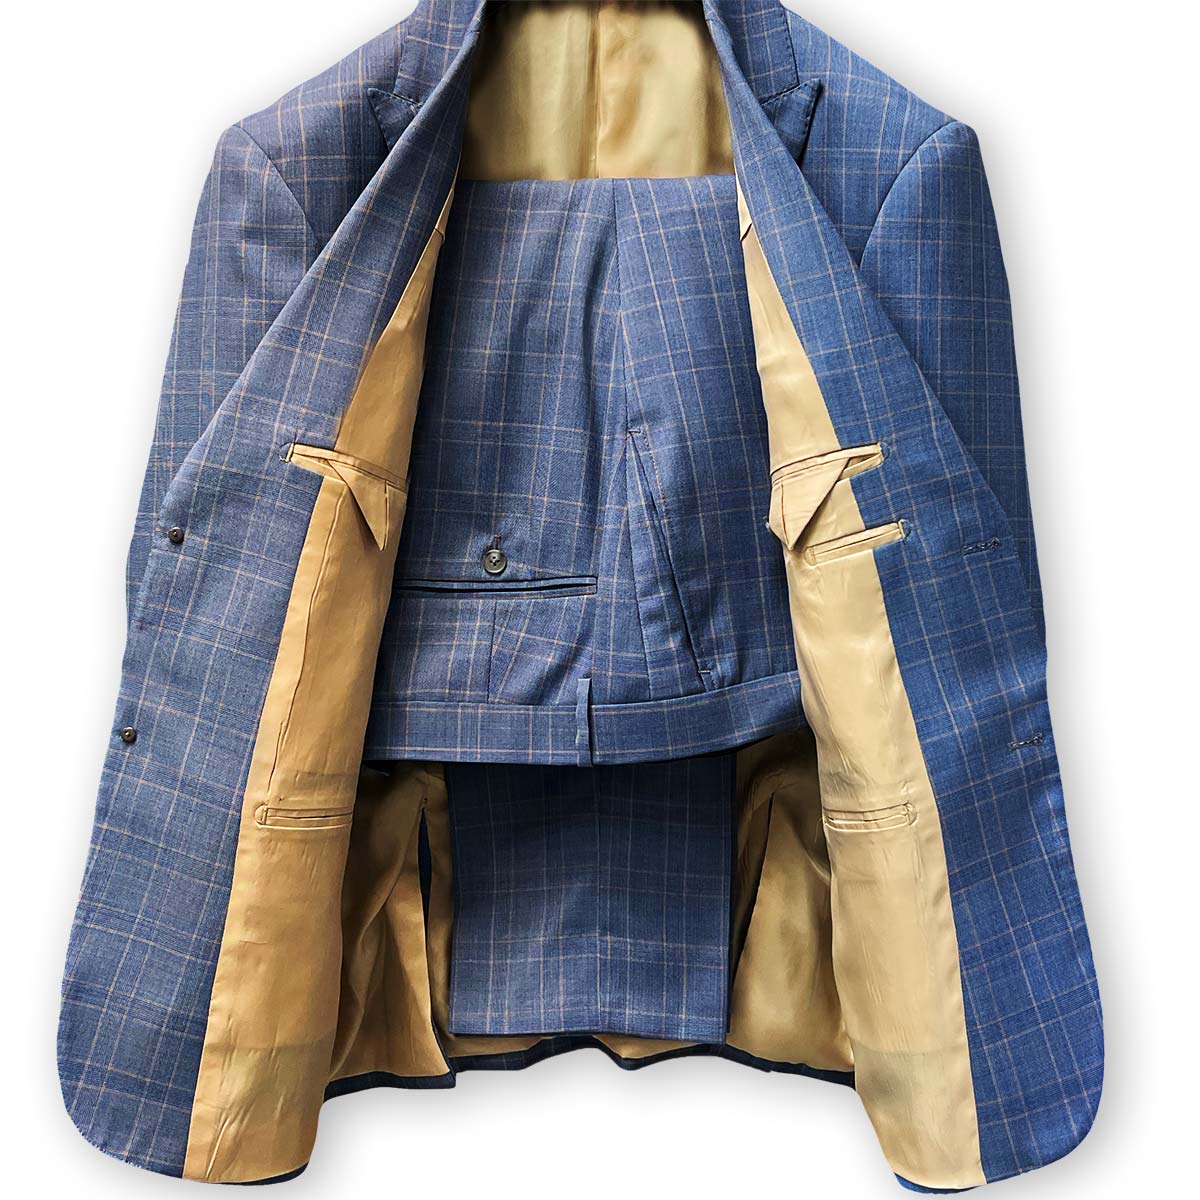 Horn buttons adding a luxurious touch to a stone blue suit.